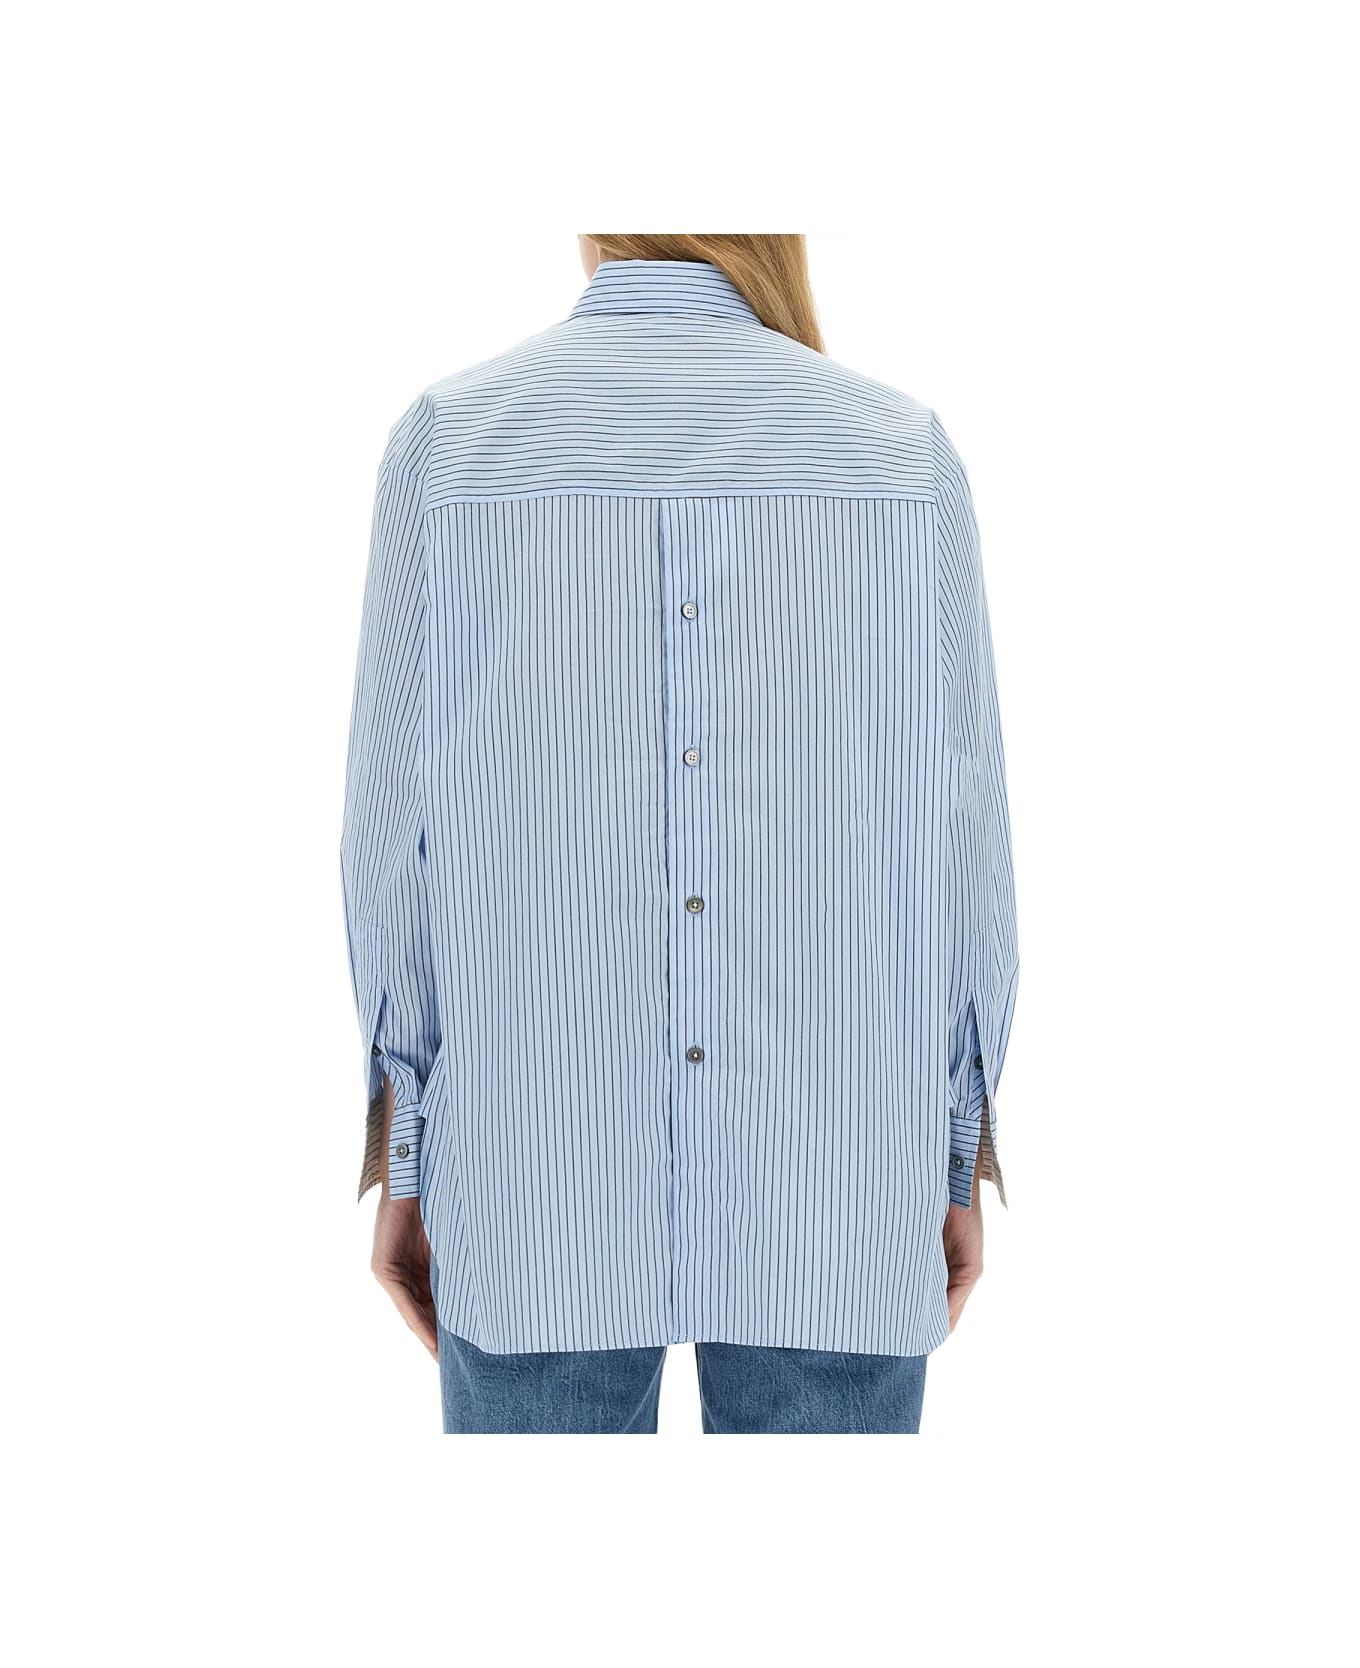 Paul Smith Striped Shirt - BABY BLUE